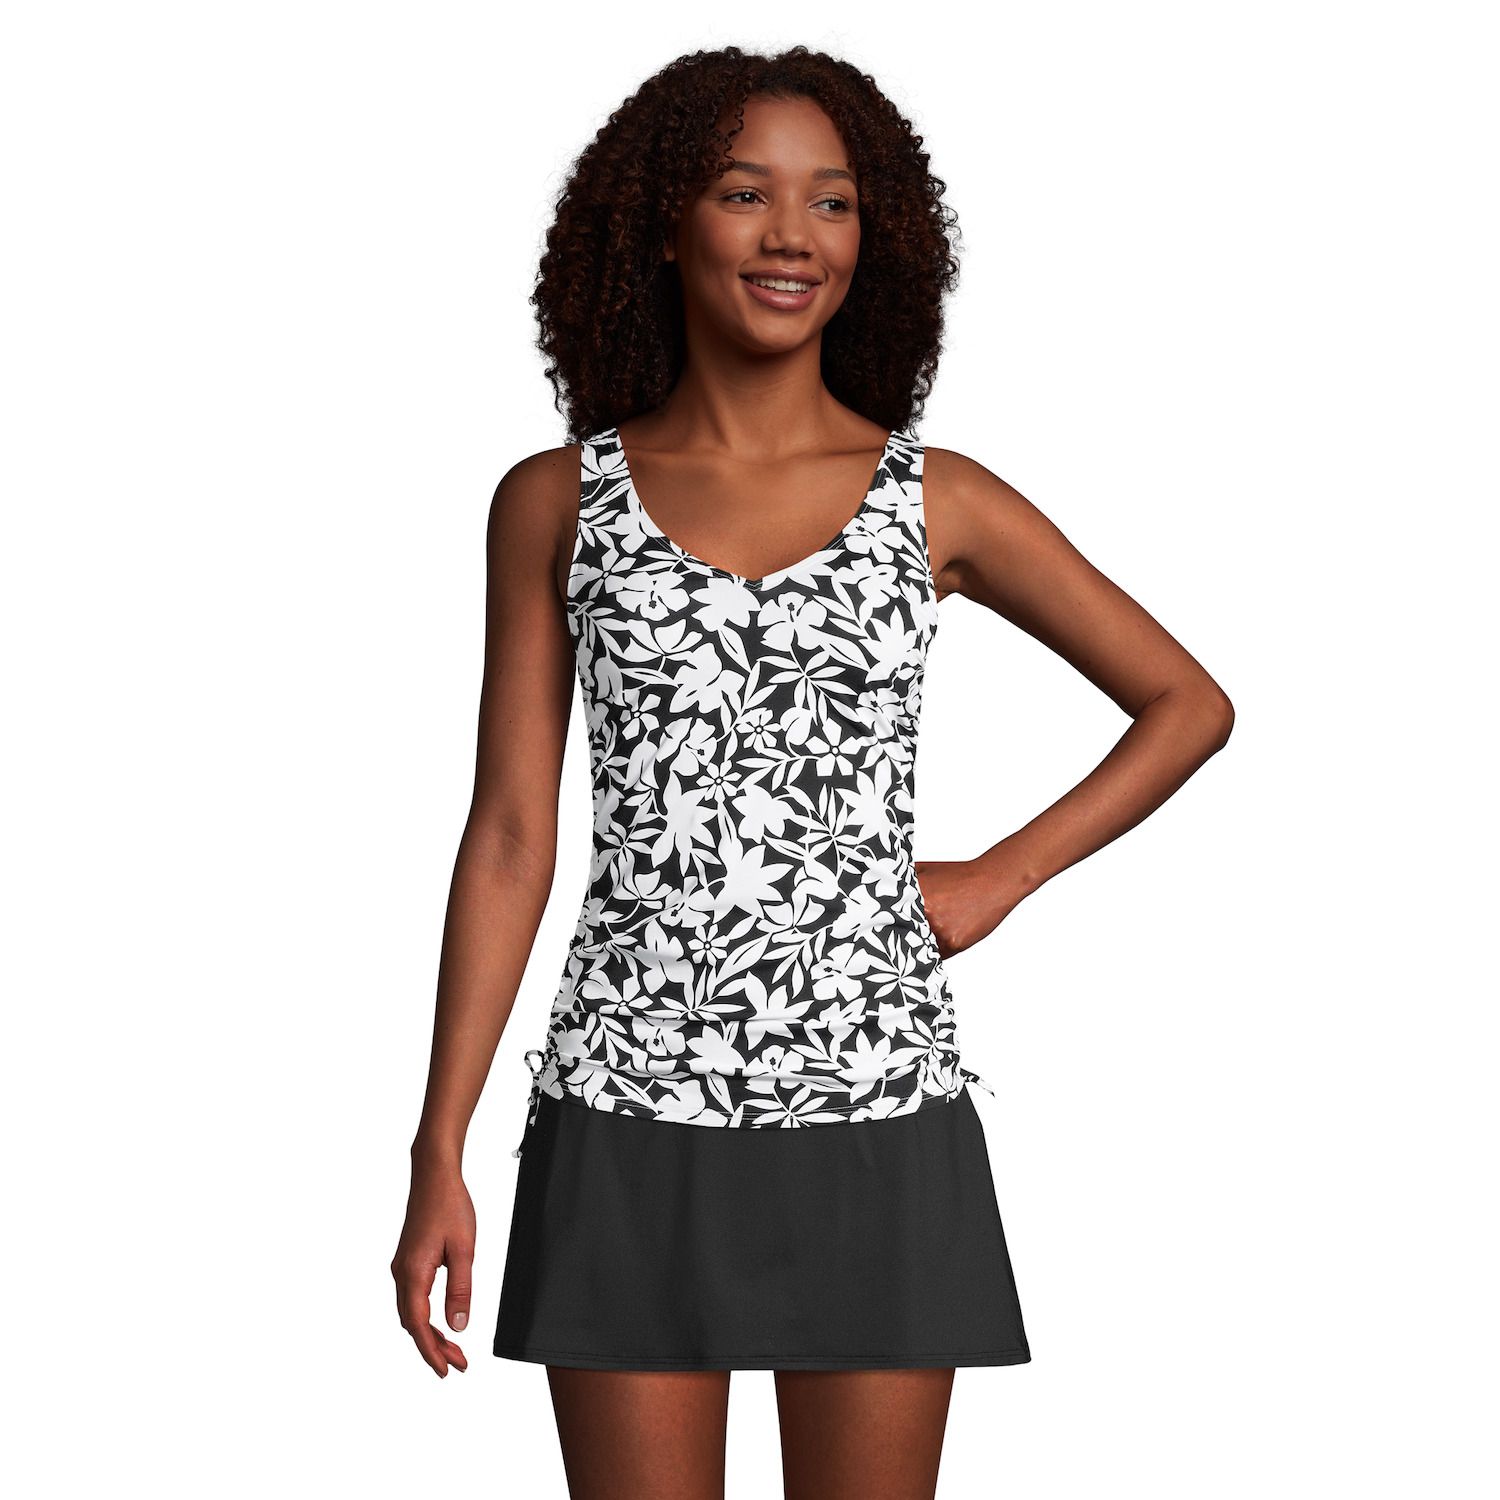 Image for Lands' End Women's Print UPF 50 V-neck Underwire Tankini Top at Kohl's.